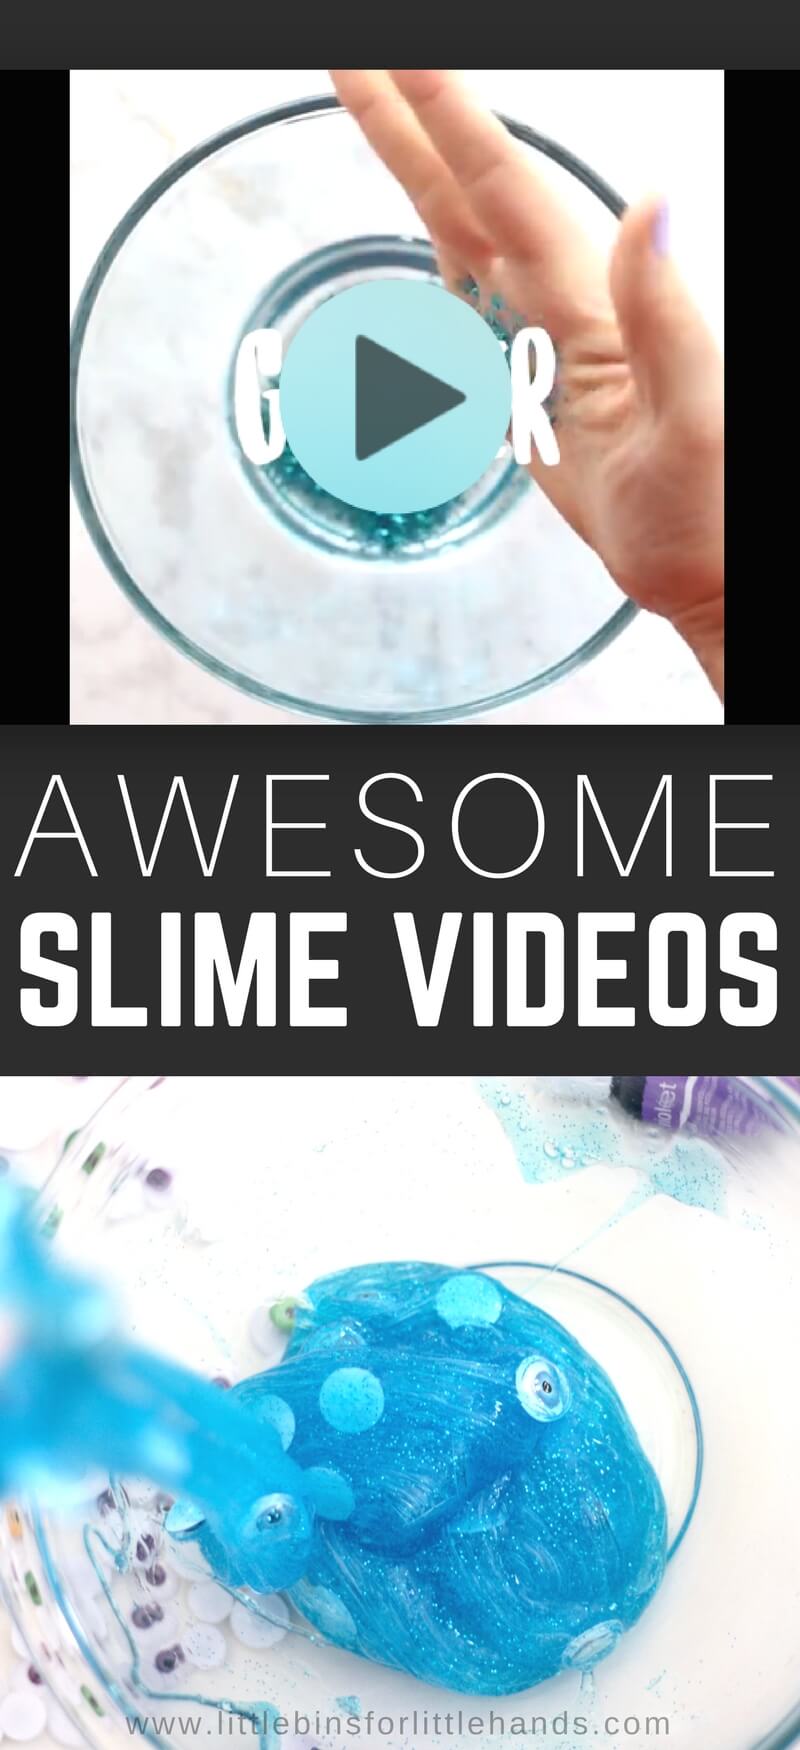 Amazing slime recipe videos to go along with our awesome homemade slime recipes for kids. Watch how to make slime and try out our easy homemade slime recipes including our 4 basic slime recipes like saline slime, liquid starch slime, fluffy slime, and borax slime. We will be continually adding slime videos for holidays and seasons as well as specialty slime ideas!